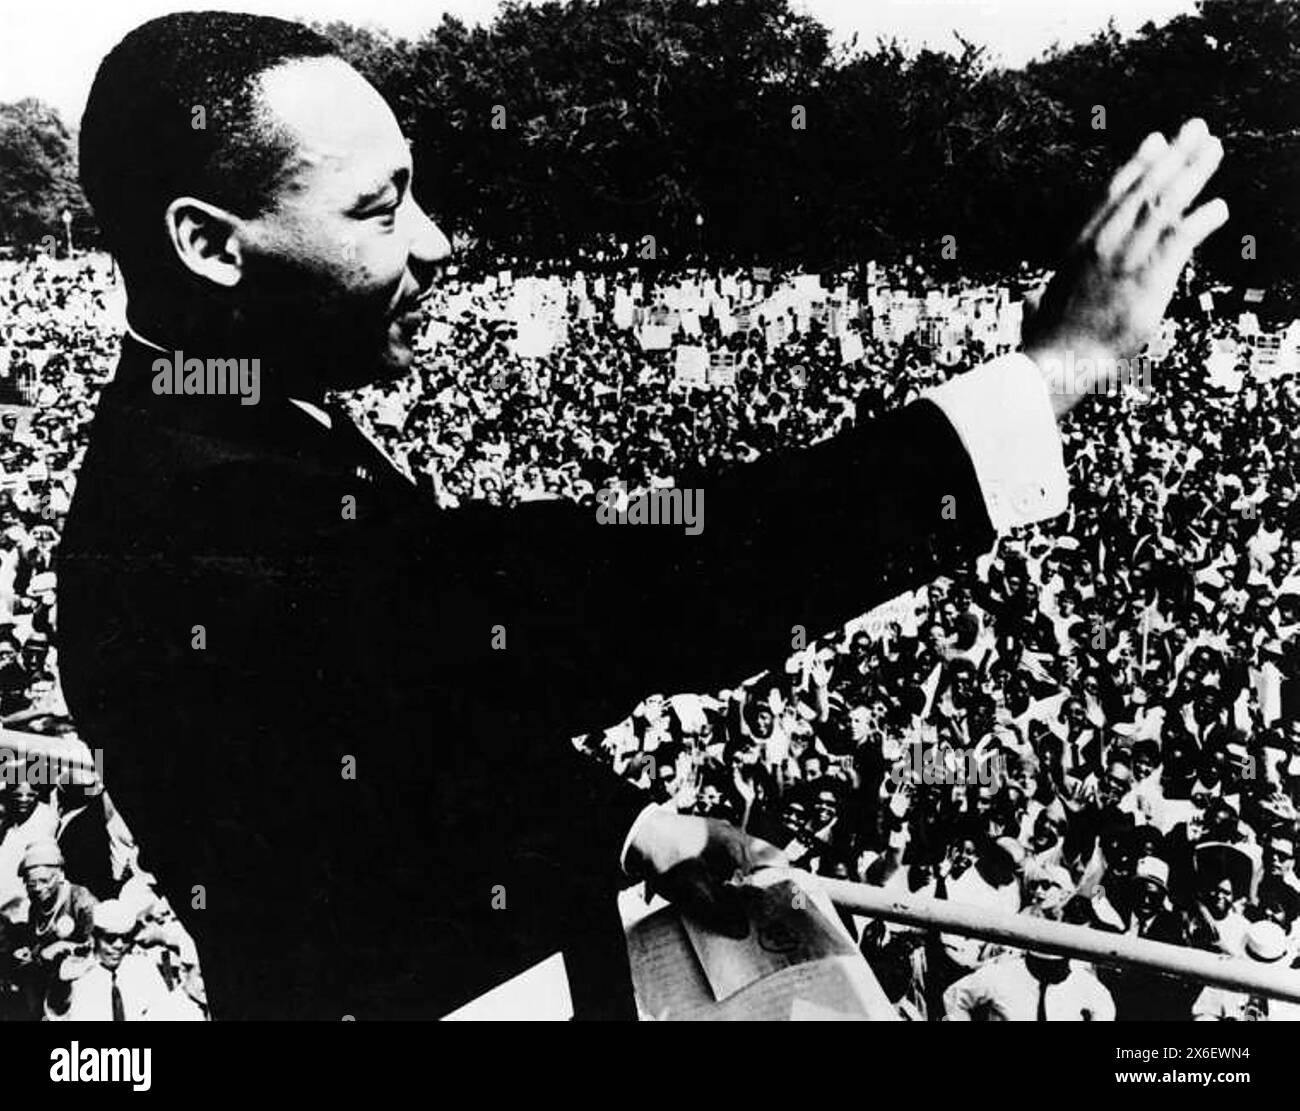 Dr. Martin Luther King, Jr., waving to crowd during from Lincoln Memorial during March on Washington for Jobs and Freedom, Washington, D.C., USA, August 28, 1963 Stock Photo